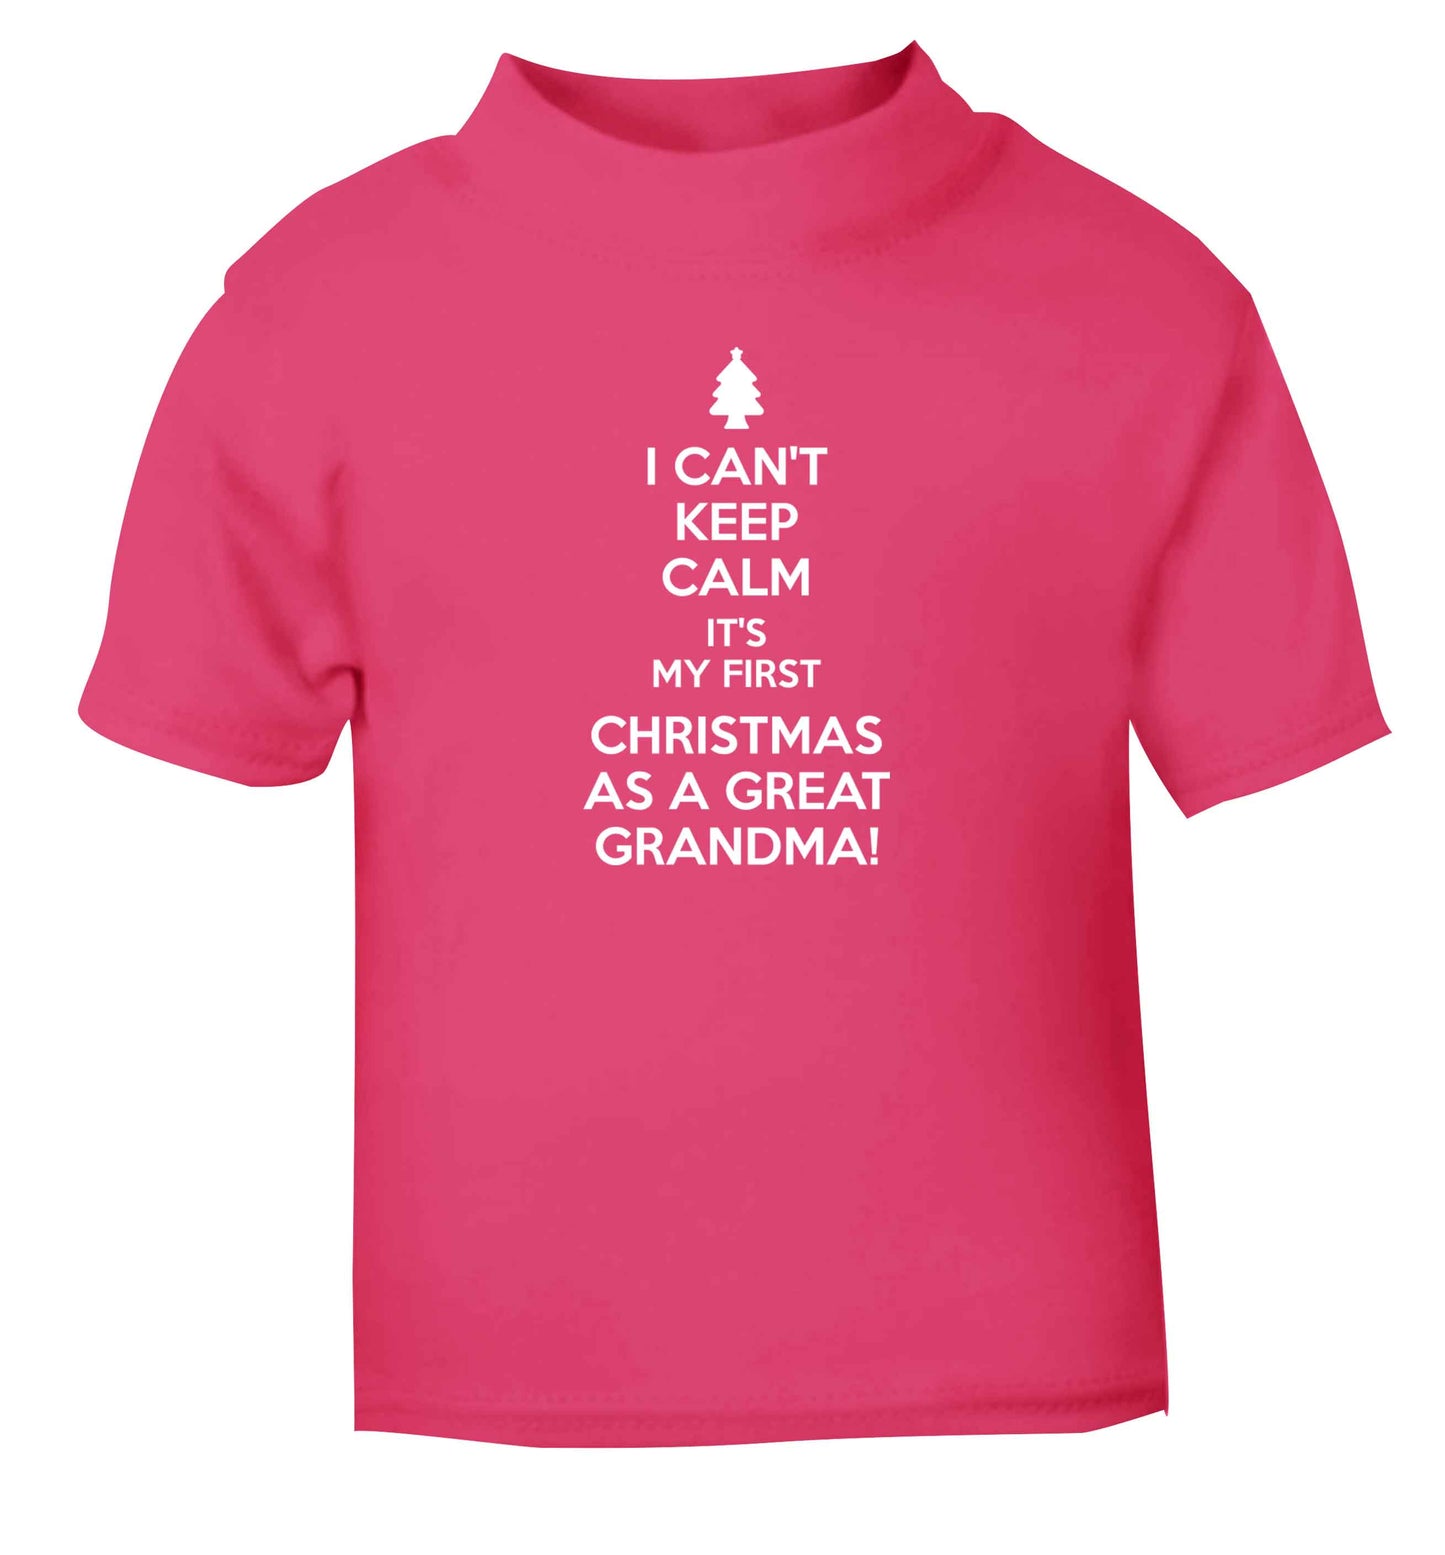 I can't keep calm it's my first Christmas as a great grandma! pink Baby Toddler Tshirt 2 Years